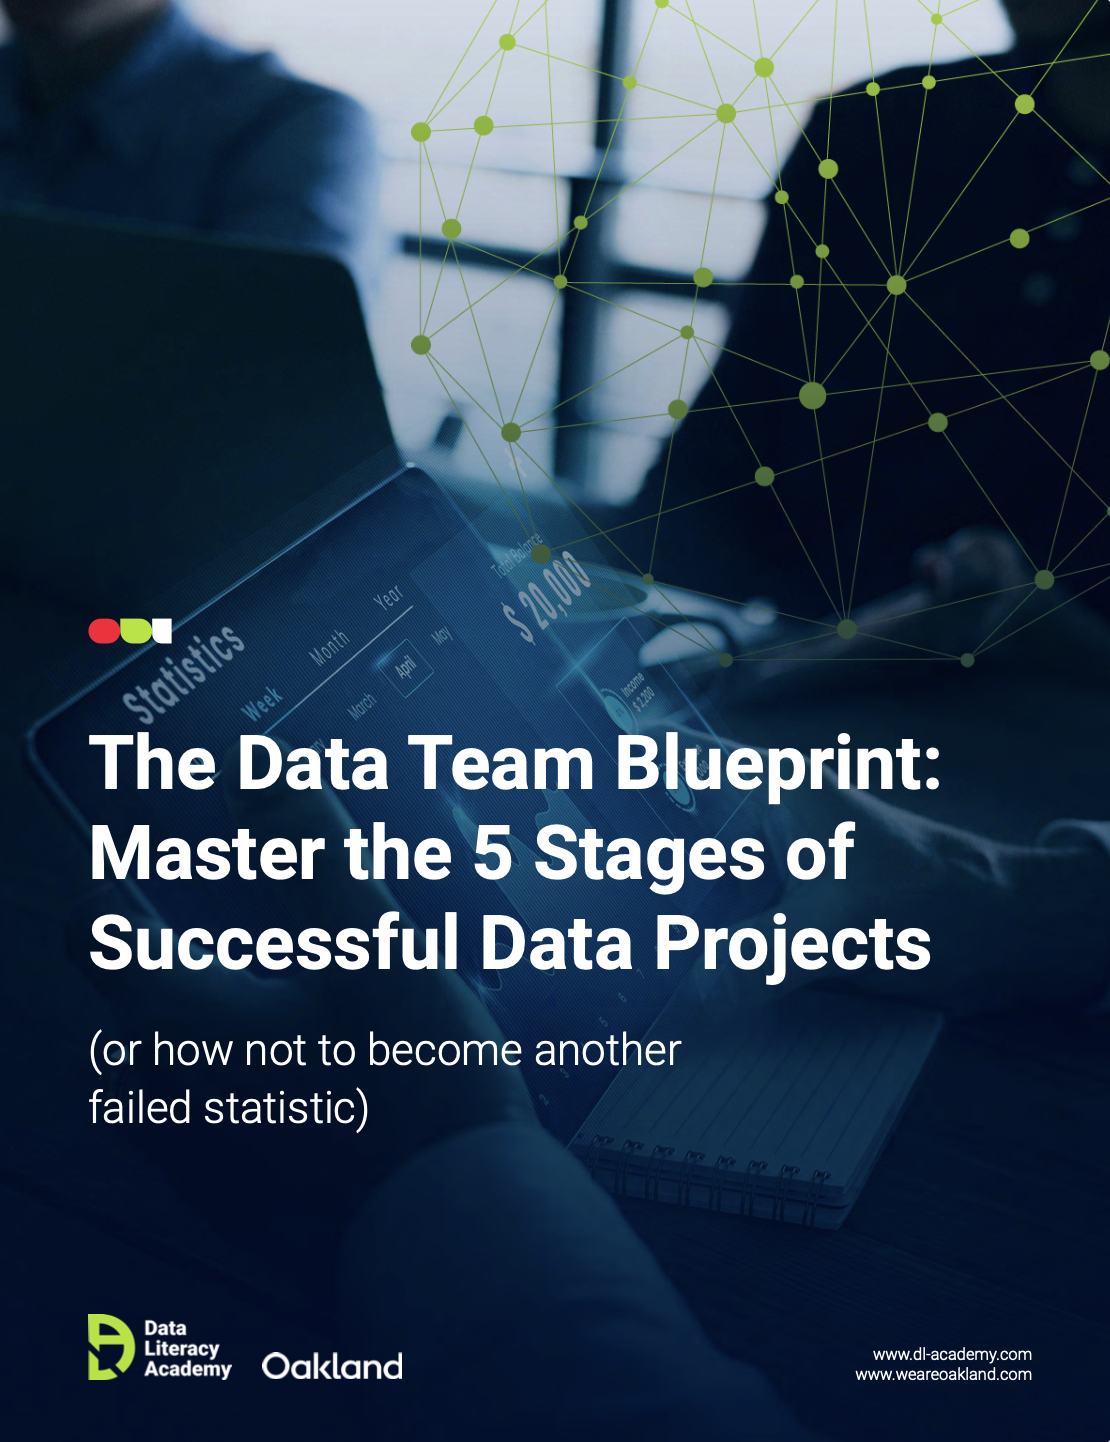 The Data Team Blueprint: Master the 5 Stages of Successful Data Projects